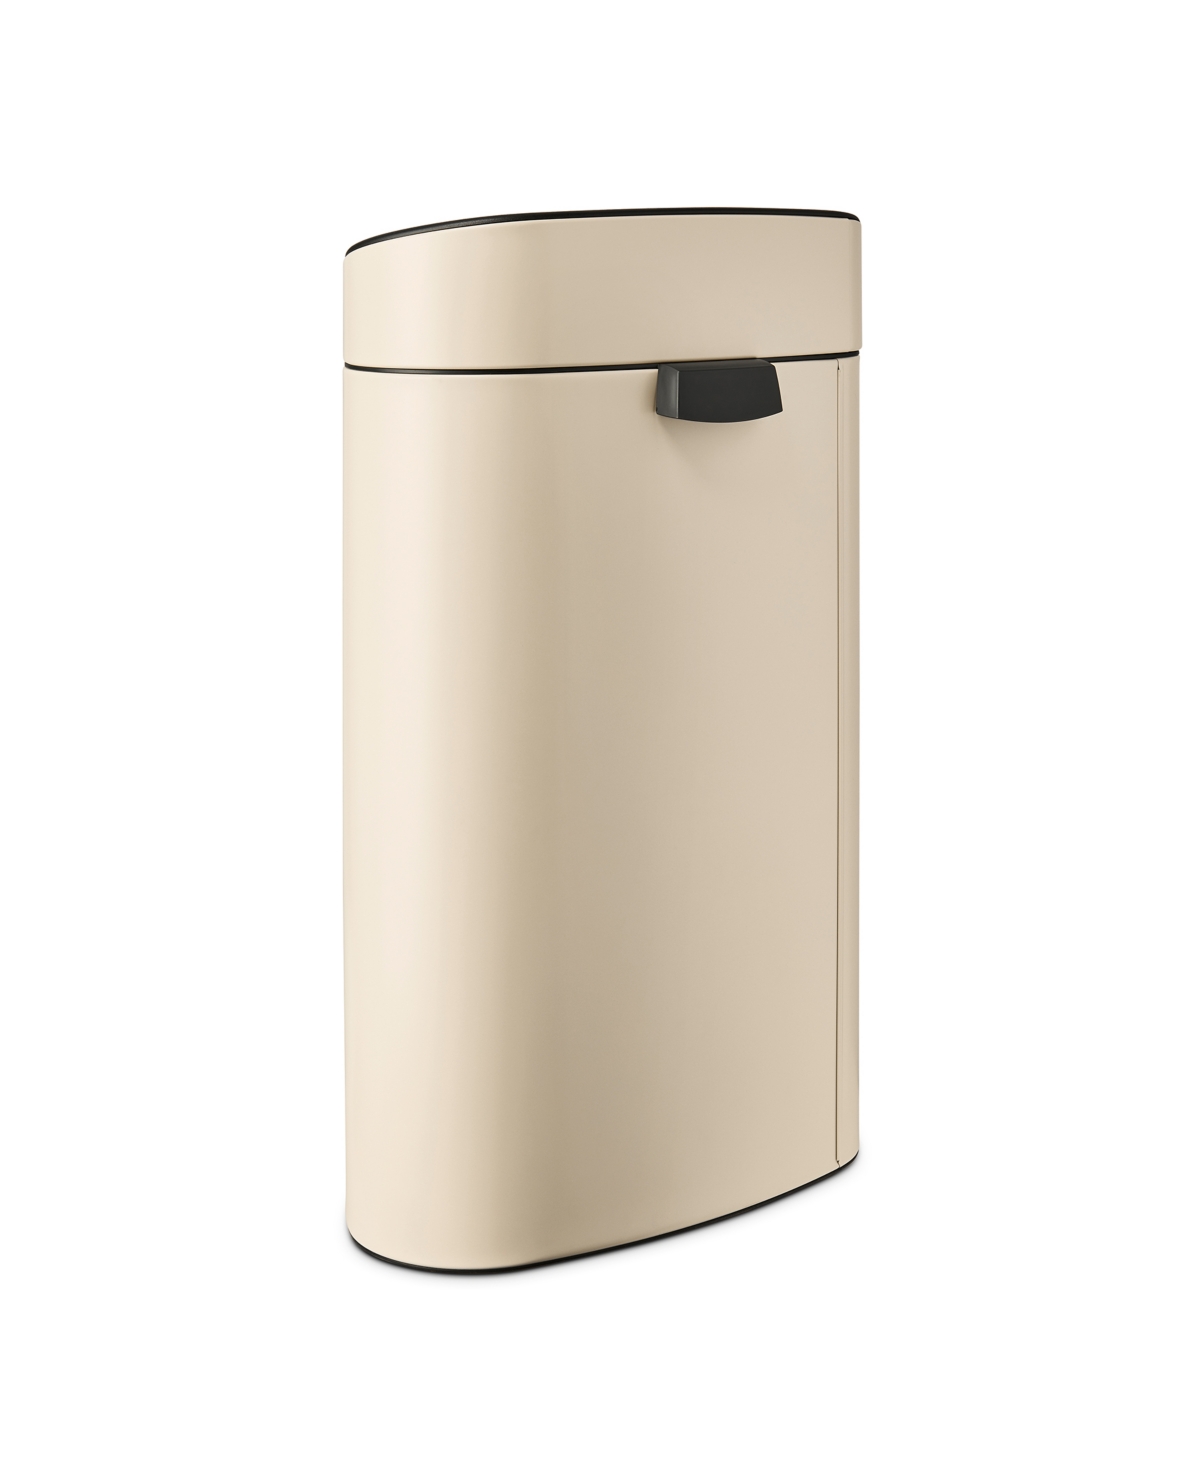 Brabantia Touch Top Trash Can New, 10.6 Gallon, 40 Liter In Soft Beige